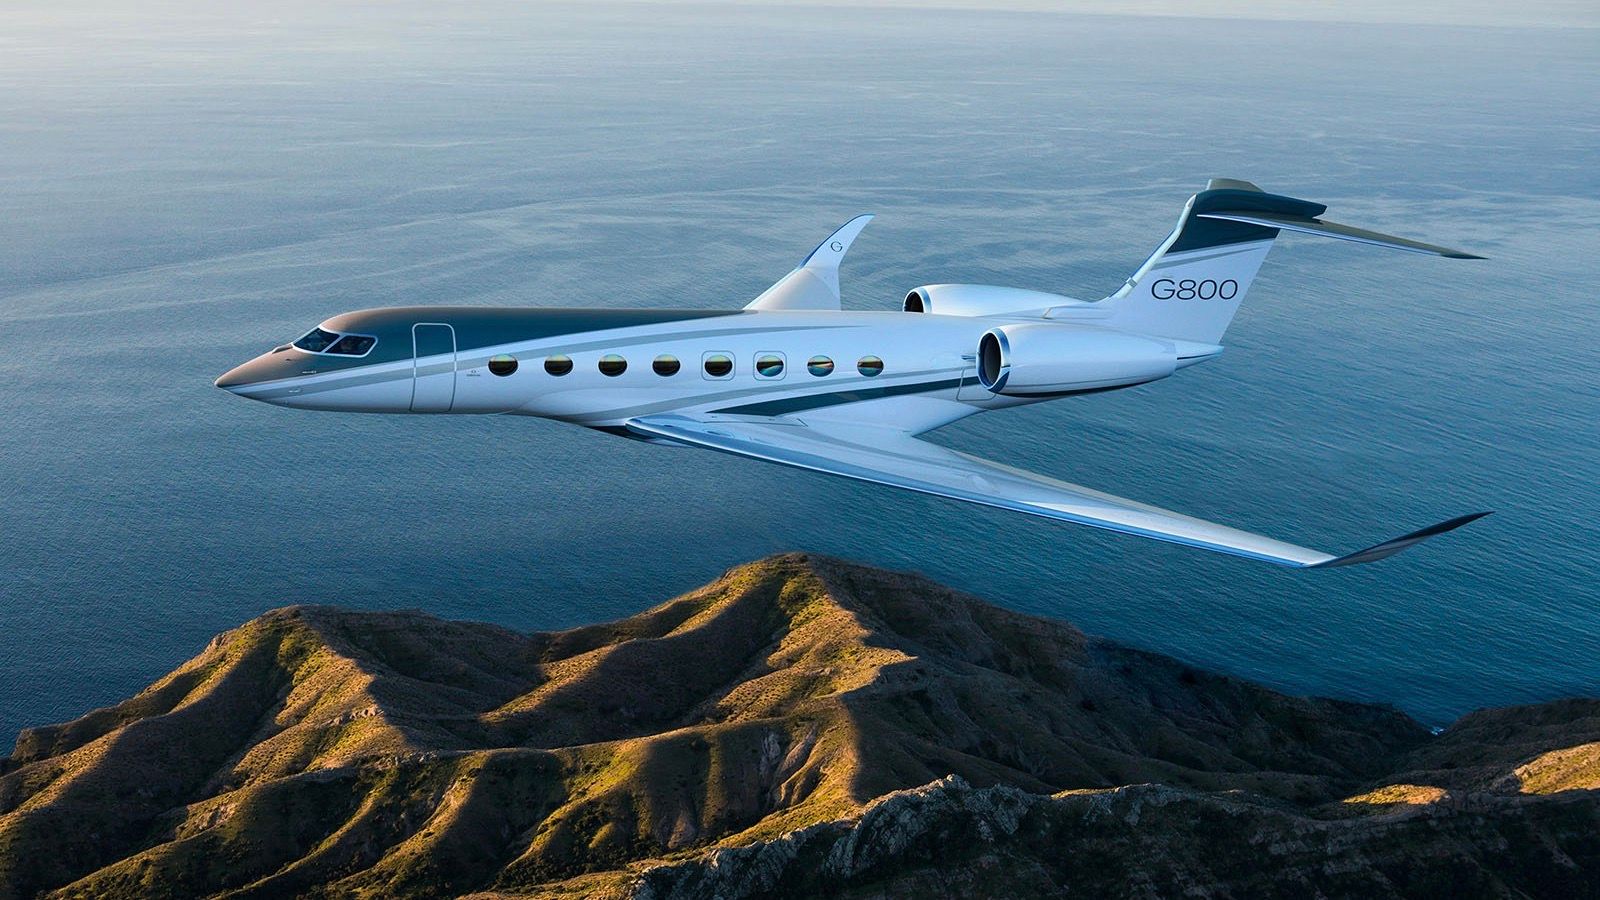 Gulfstream G800 flying over mountains